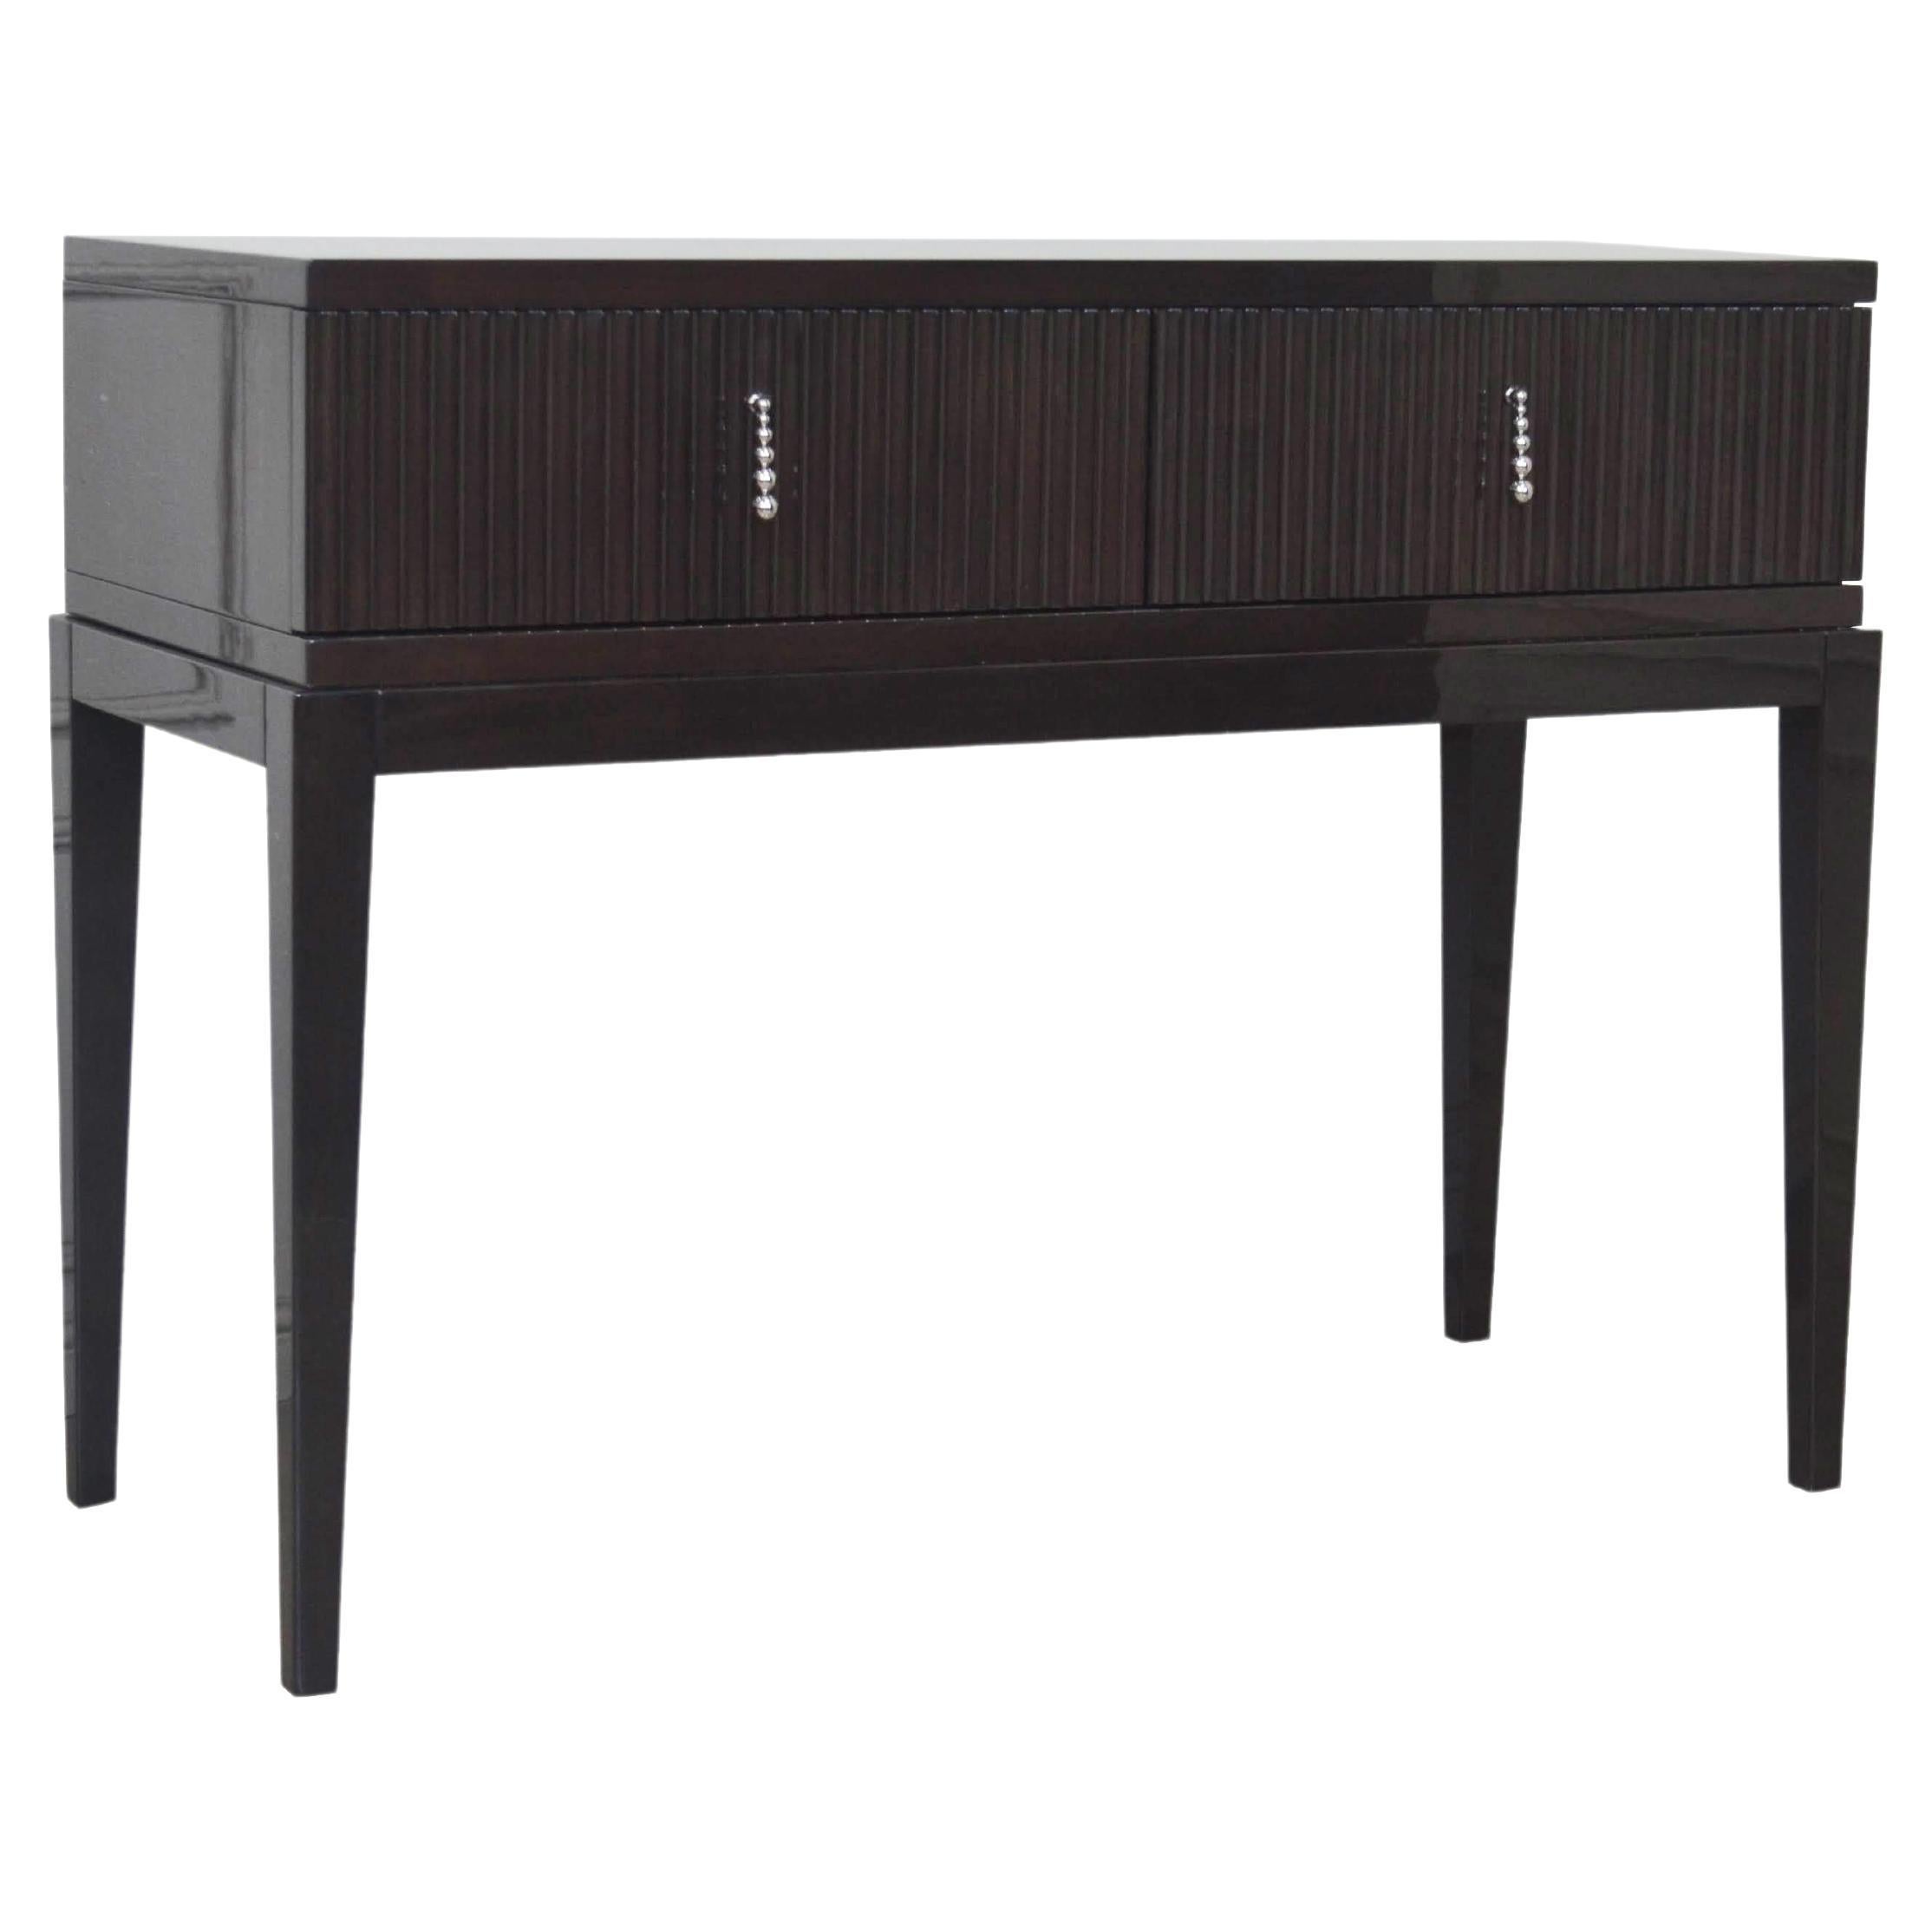 Italian Modern Console in Dark High-Gloss Ebony Finishing With Two Drawers For Sale